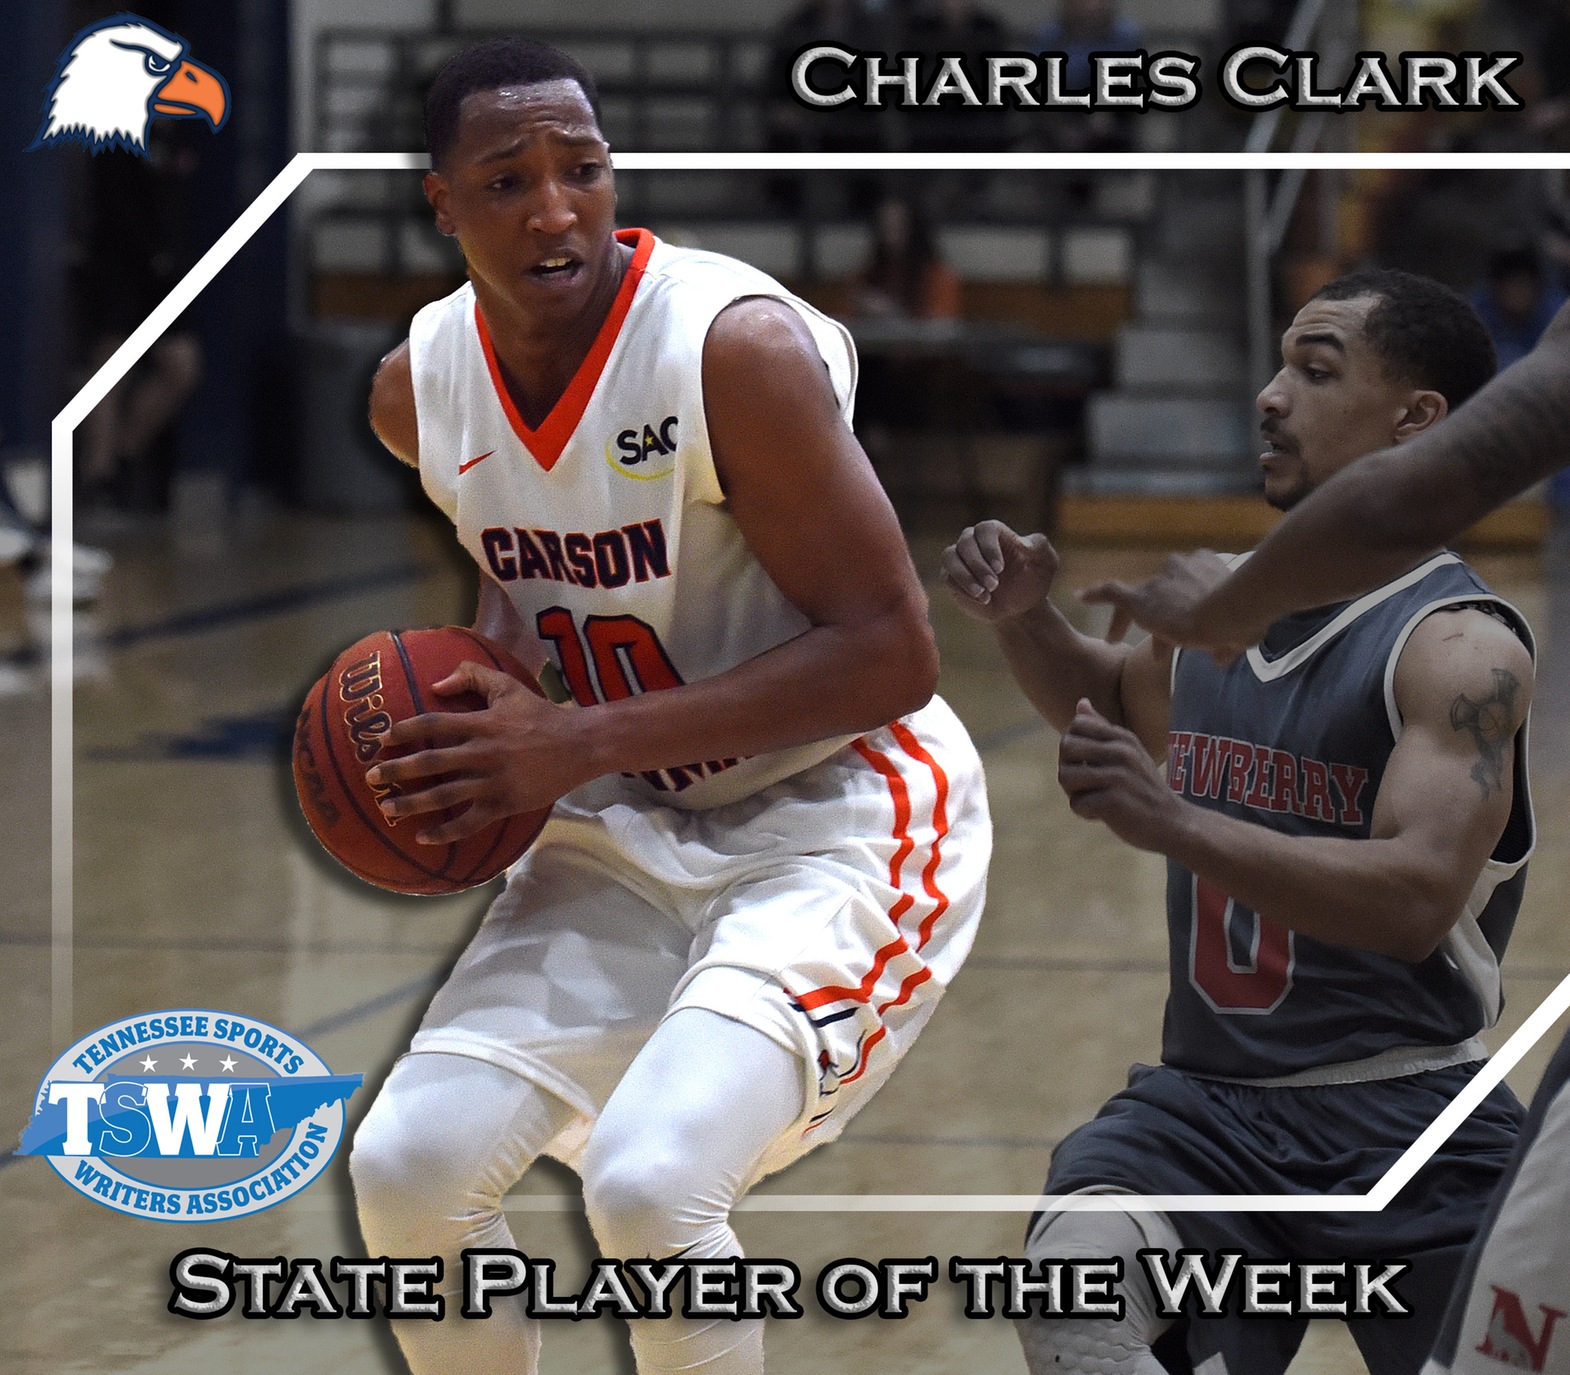 Awards roll in for Clark, junior named TSWA Player of the Week